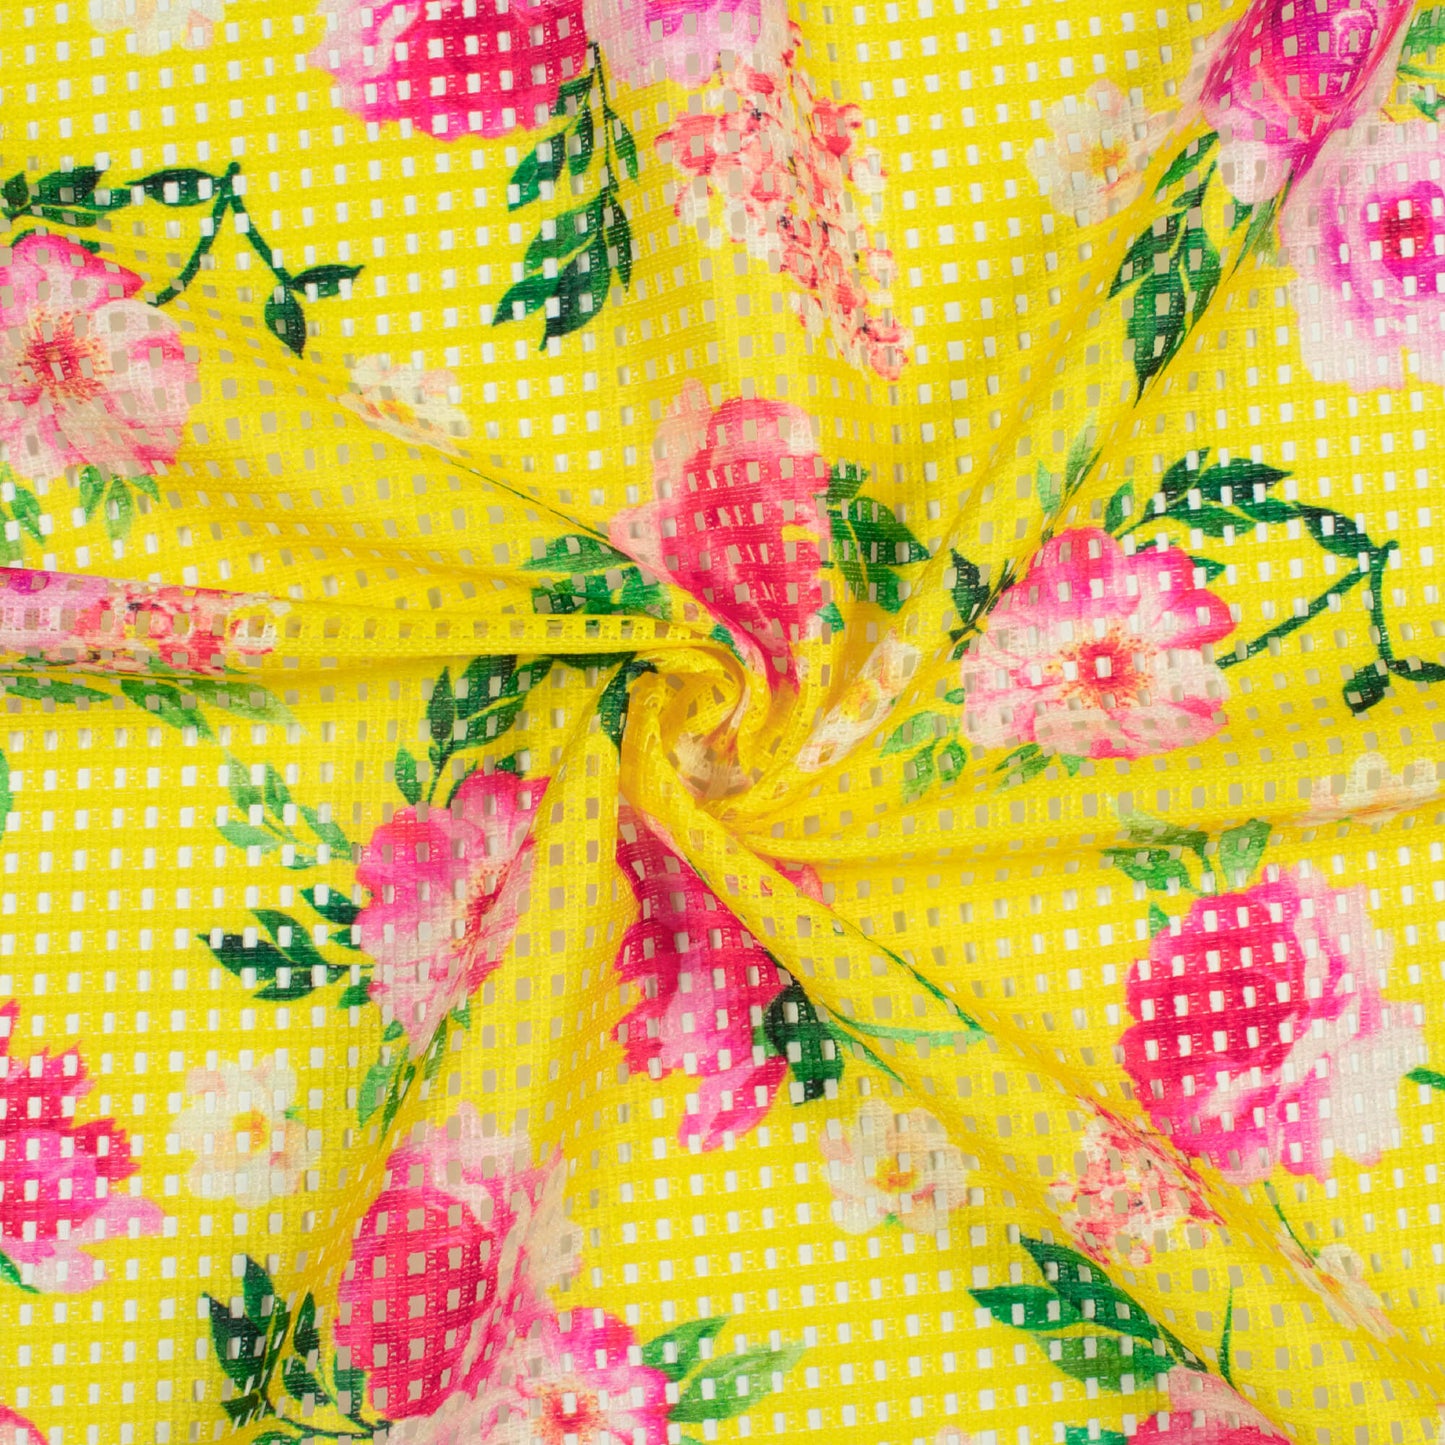 Bumblebee Yellow And Pink Floral Pattern Digital Print Checks Raschel Net Fabric (Width 58 Inches)